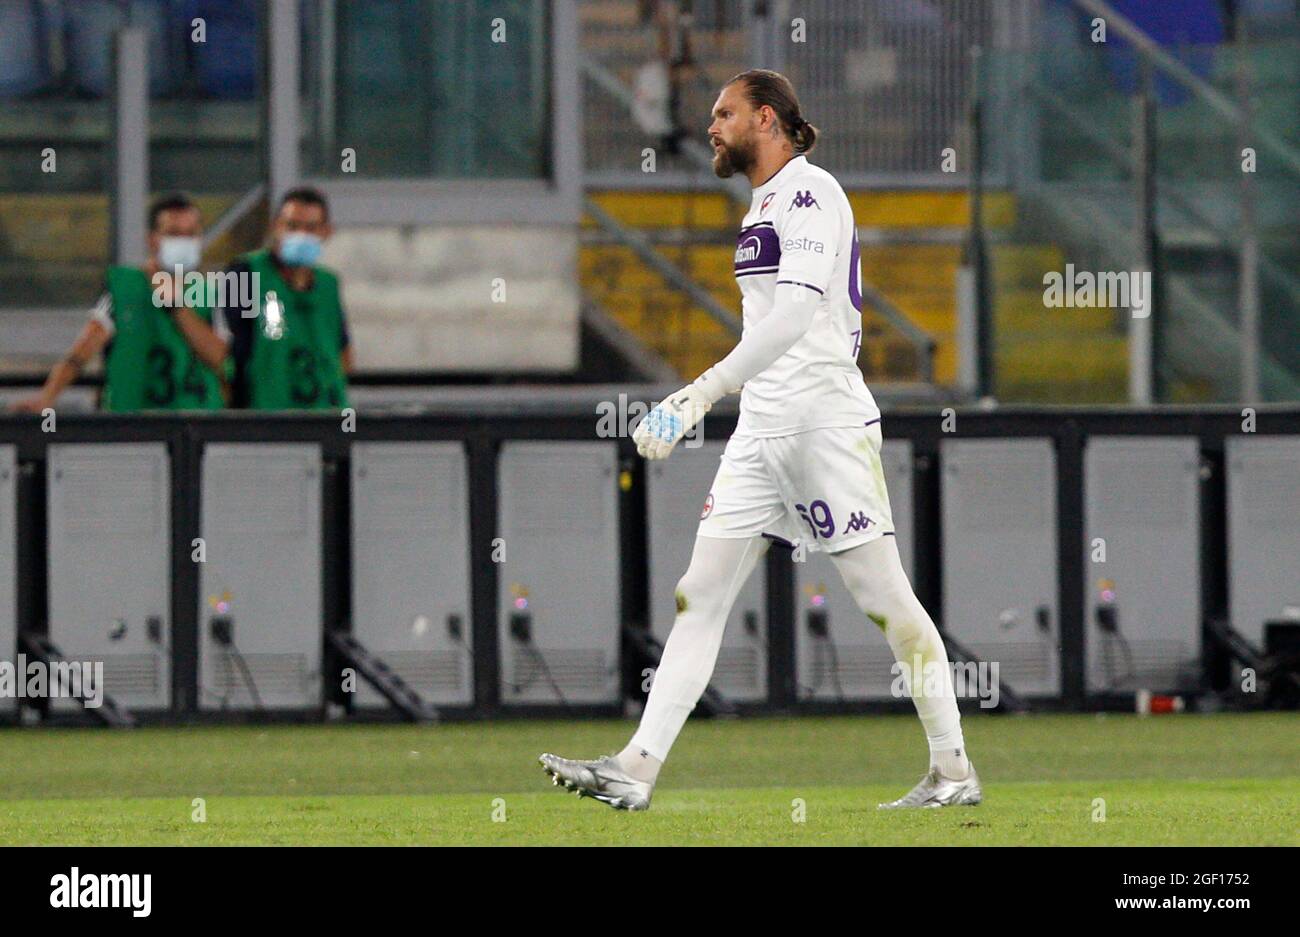 Rome, Italy. 22nd Aug, 2021. Bartlomiej Dragowski, goalkeeper of Fiorentina, leaves the pitch after receiving a red card during the Serie A soccer match between Roma and Fiorentina at the Olympic Stadium. Credit: Stefano Massimo/Alamy Live News Stock Photo